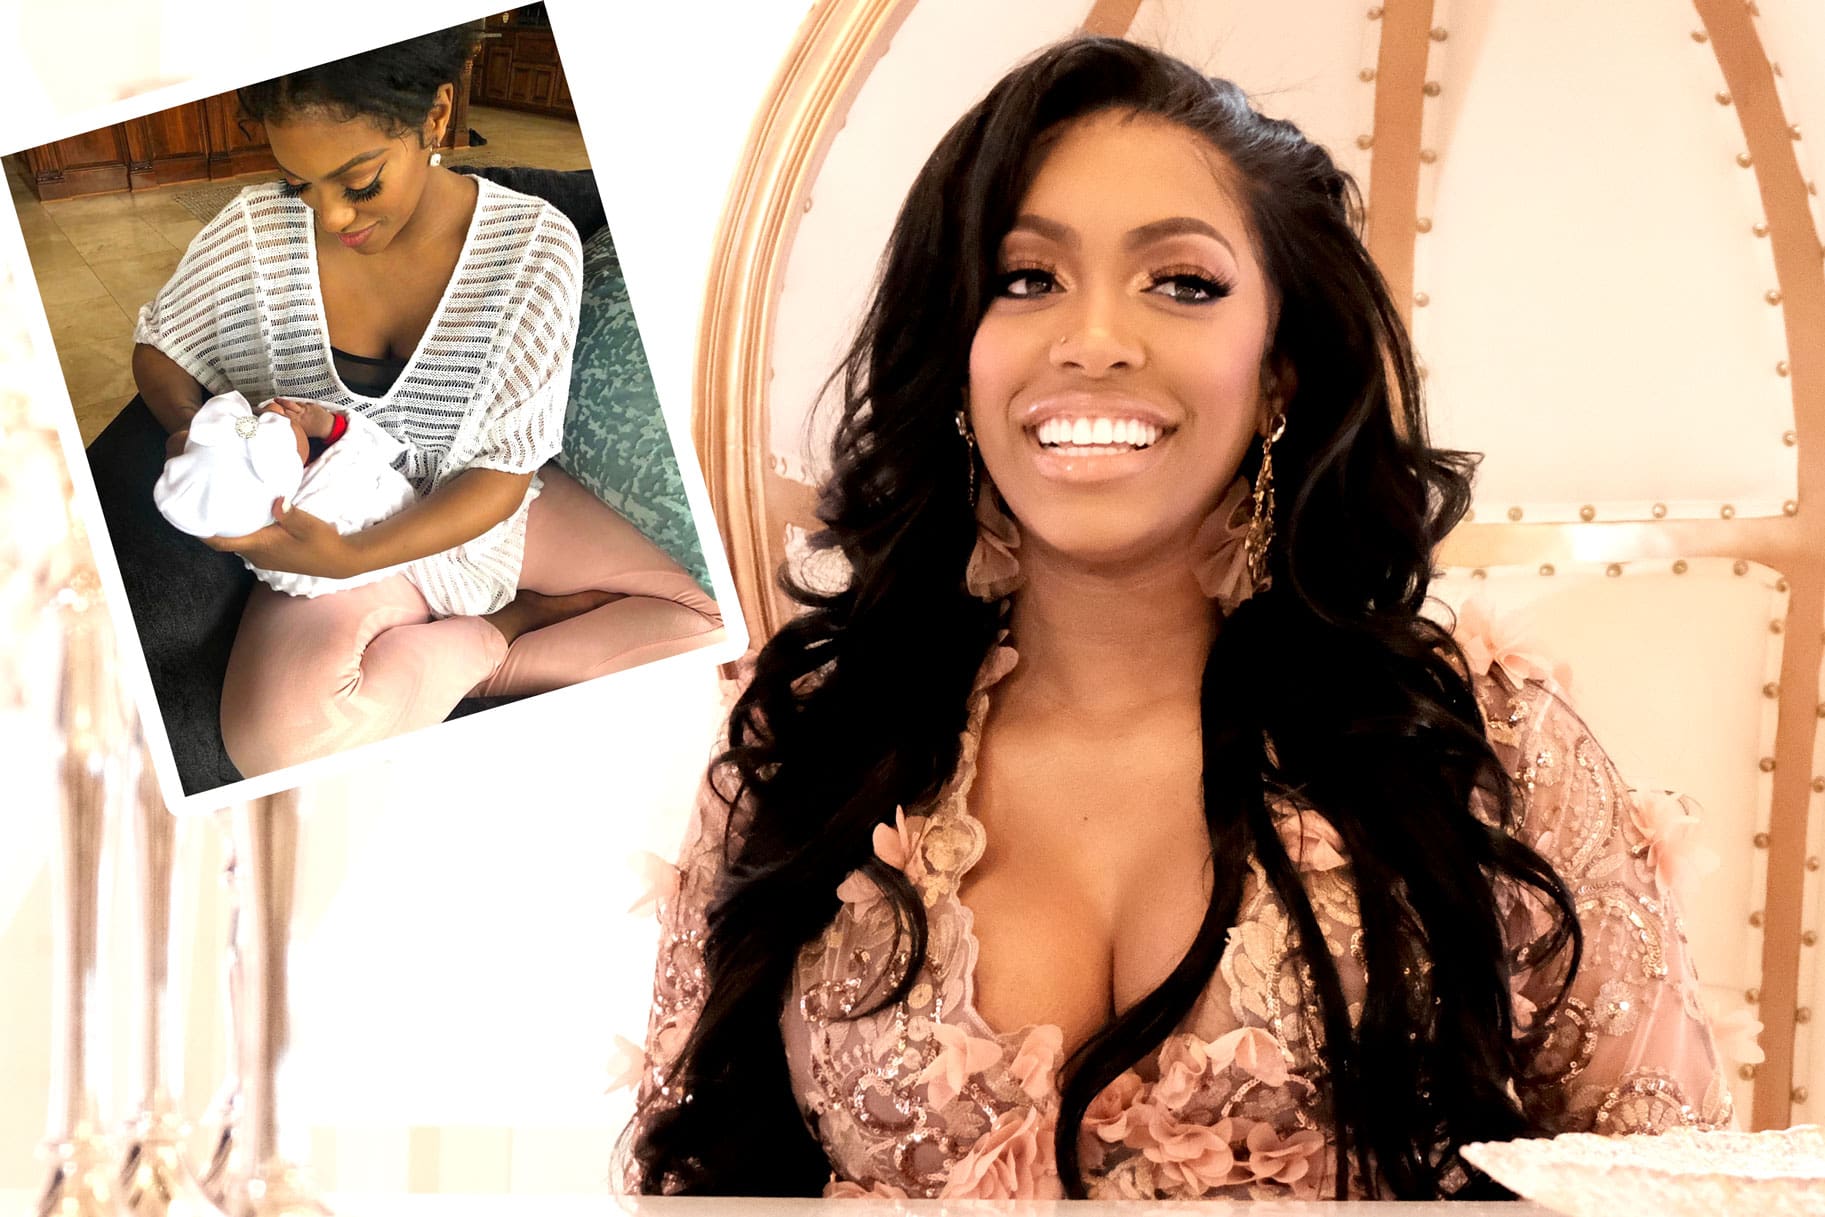 ”porsha-williams-gives-baby-pj-a-mani-pedi-in-this-cute-video-amidst-the-cheating-allegations-against-dennis-mckinley”